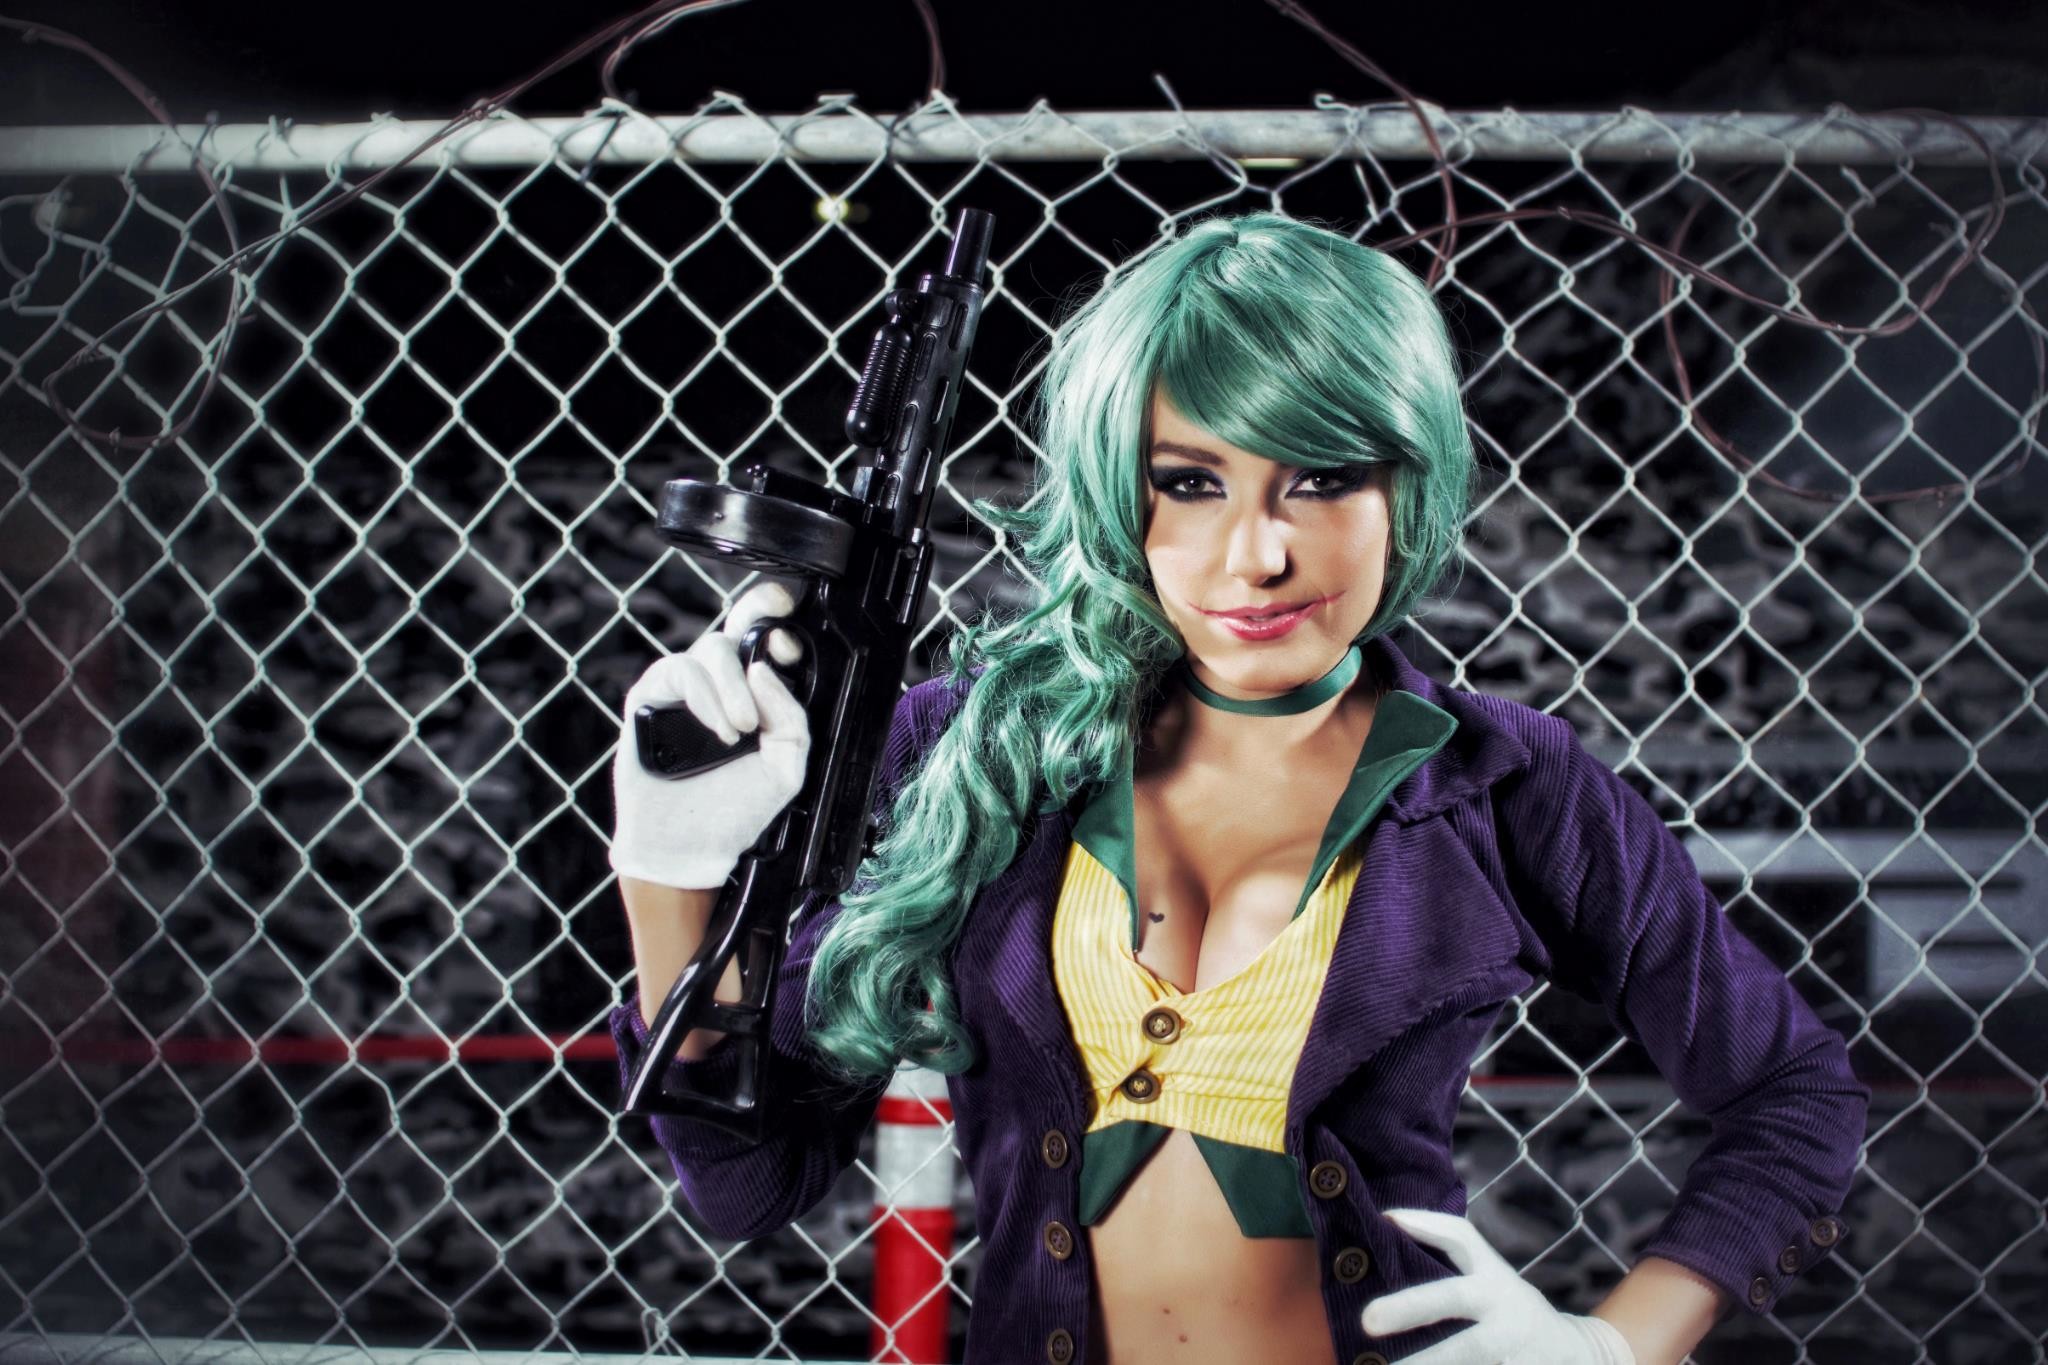 2048x1365 Jessica Nigri images Lady Joker HD wallpaper and background photos